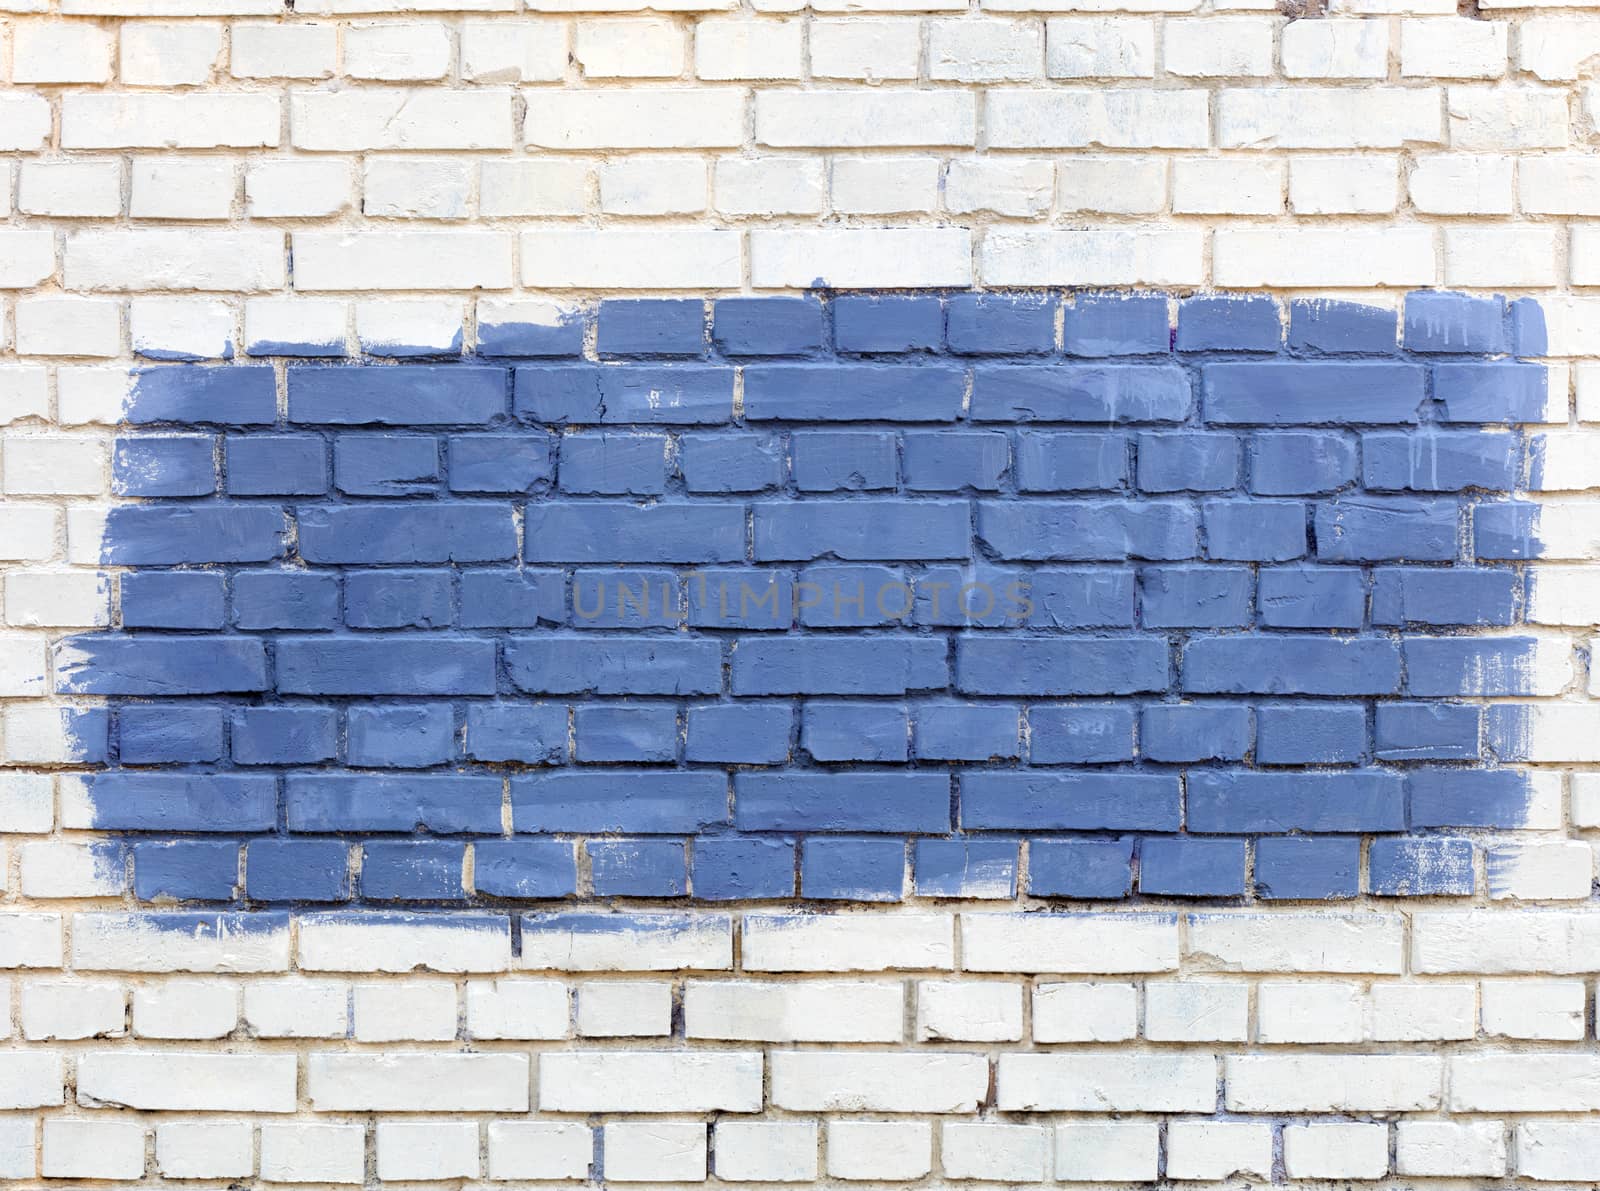 The old walls are painted with white paint and the selected fragment is painted with blue paint.